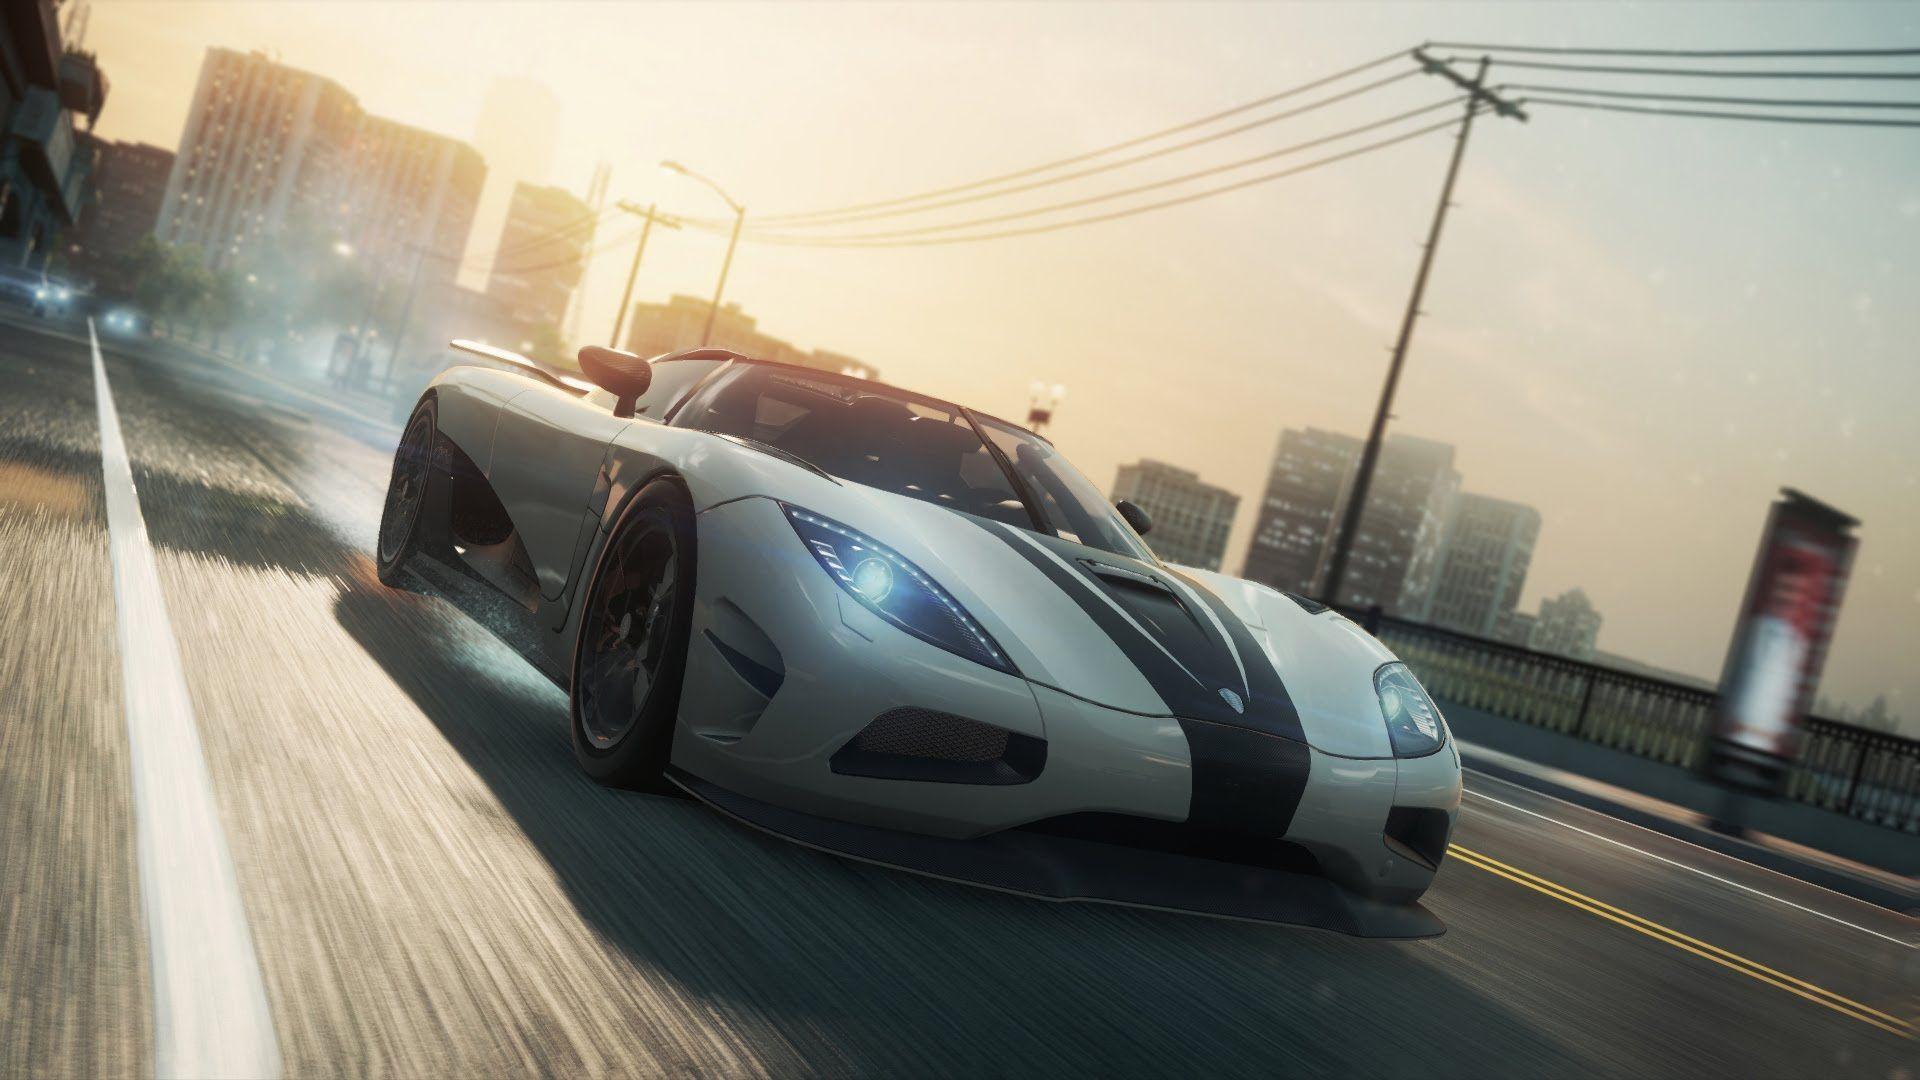 Need For Speed Most Wanted Beat the Koenigsegg Agera R, Last most